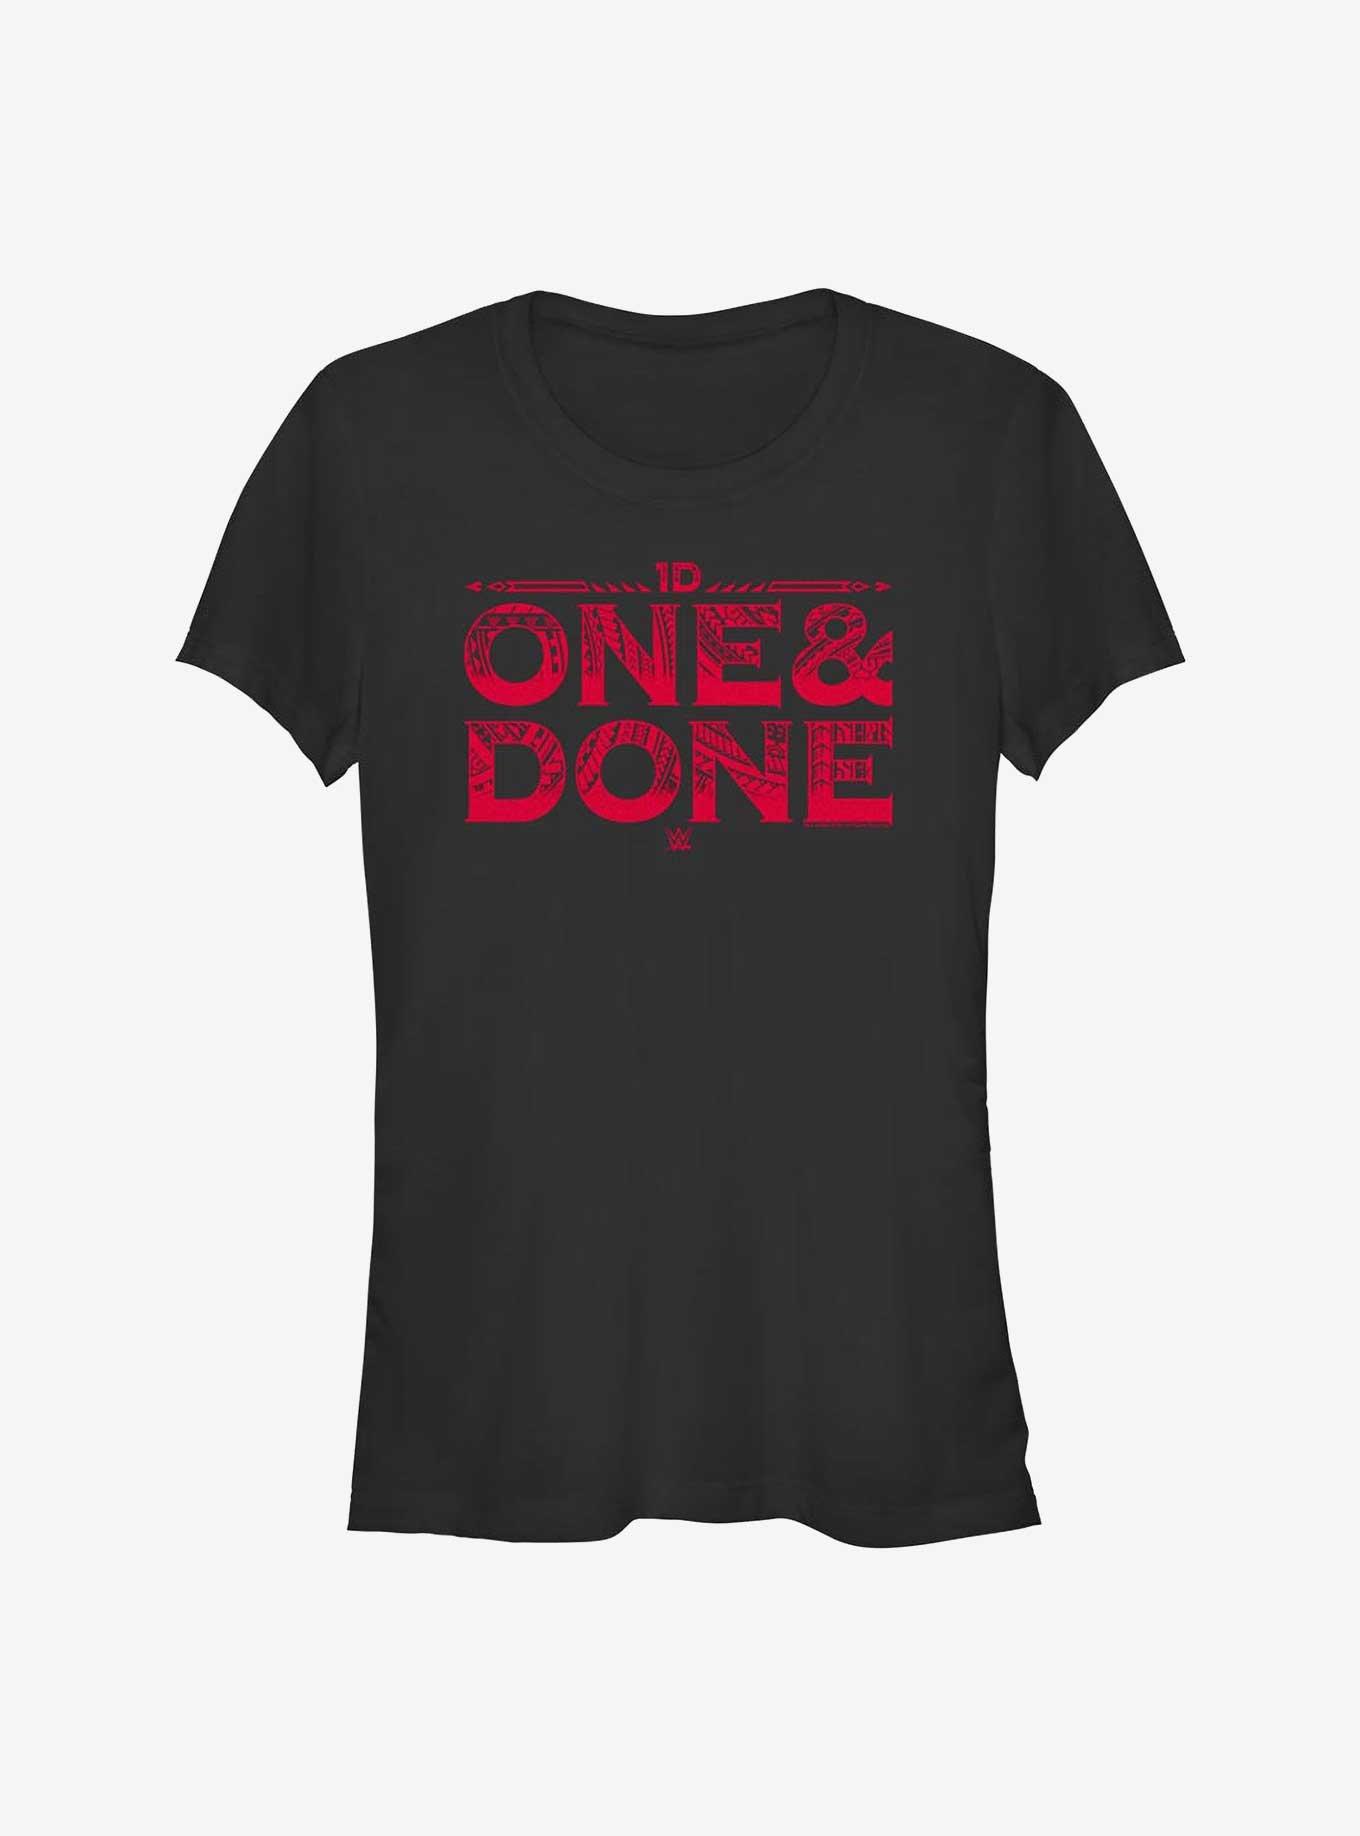 WWE The Usos One & Done Girls T-Shirt